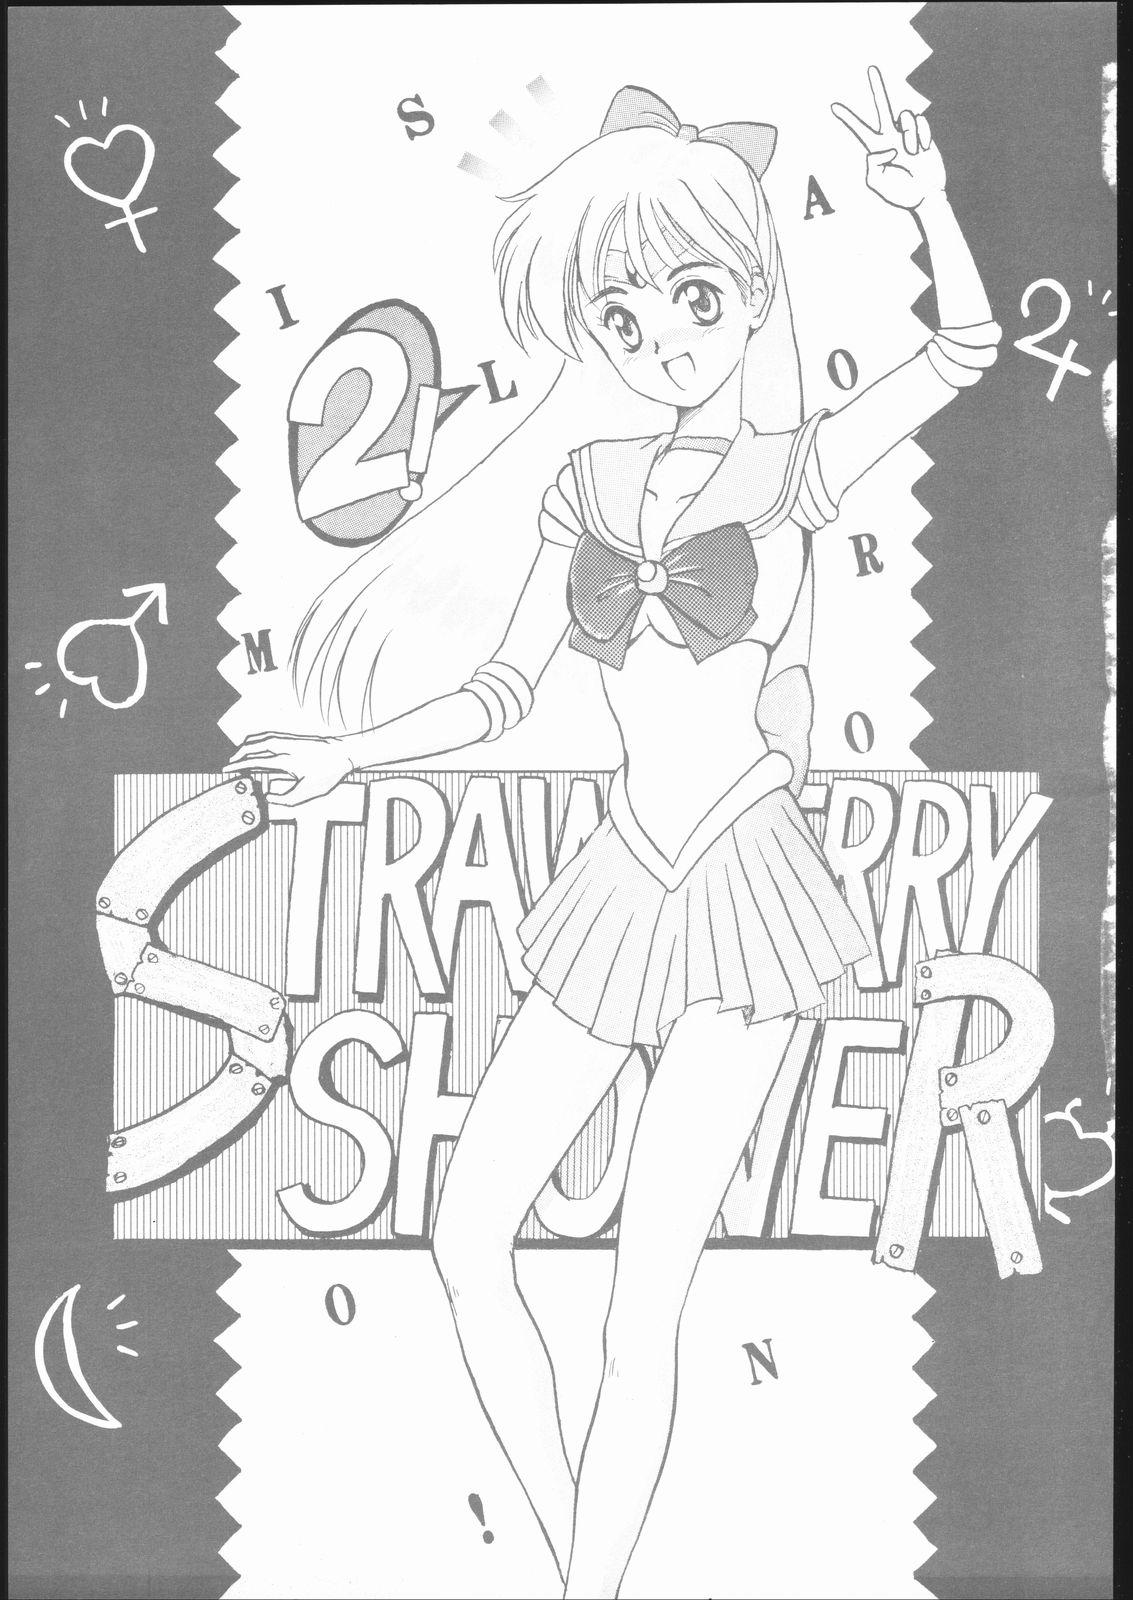 Man Strawberry Shower 2 - Sailor moon World heroes Sex Toys - Page 2